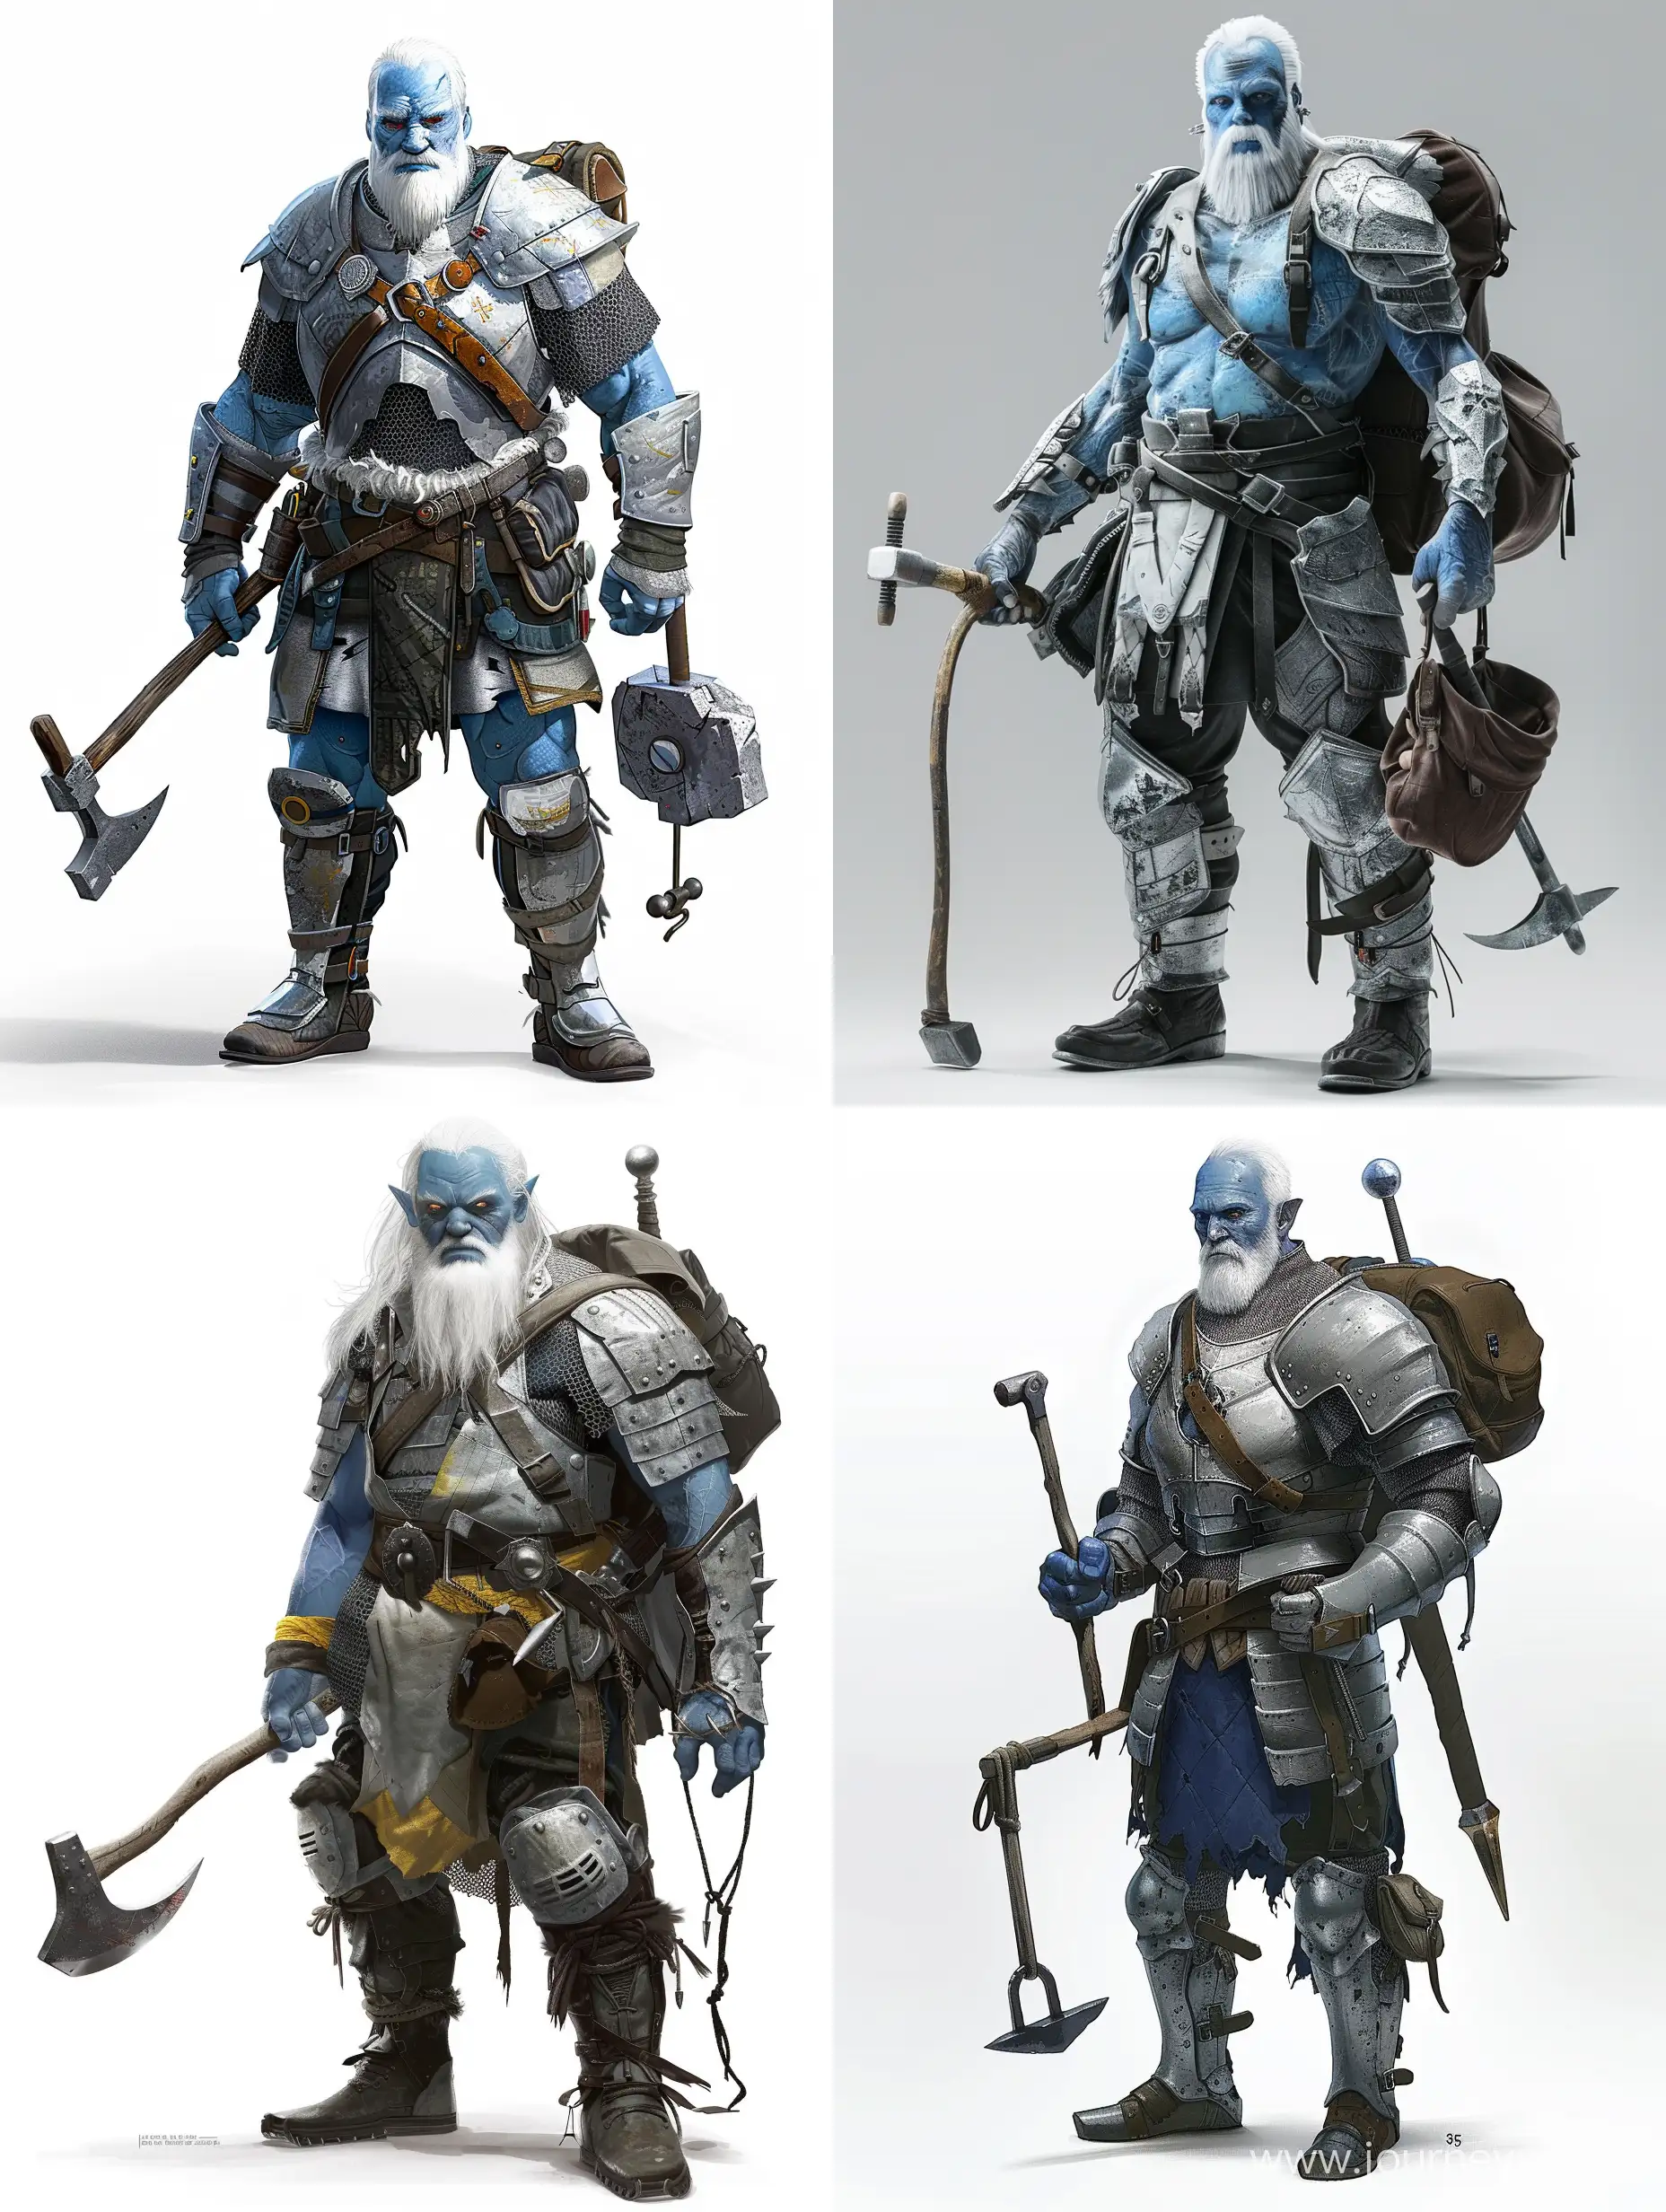 BlueSkinned-Blacksmith-with-Sickle-and-Hammer-in-Armor